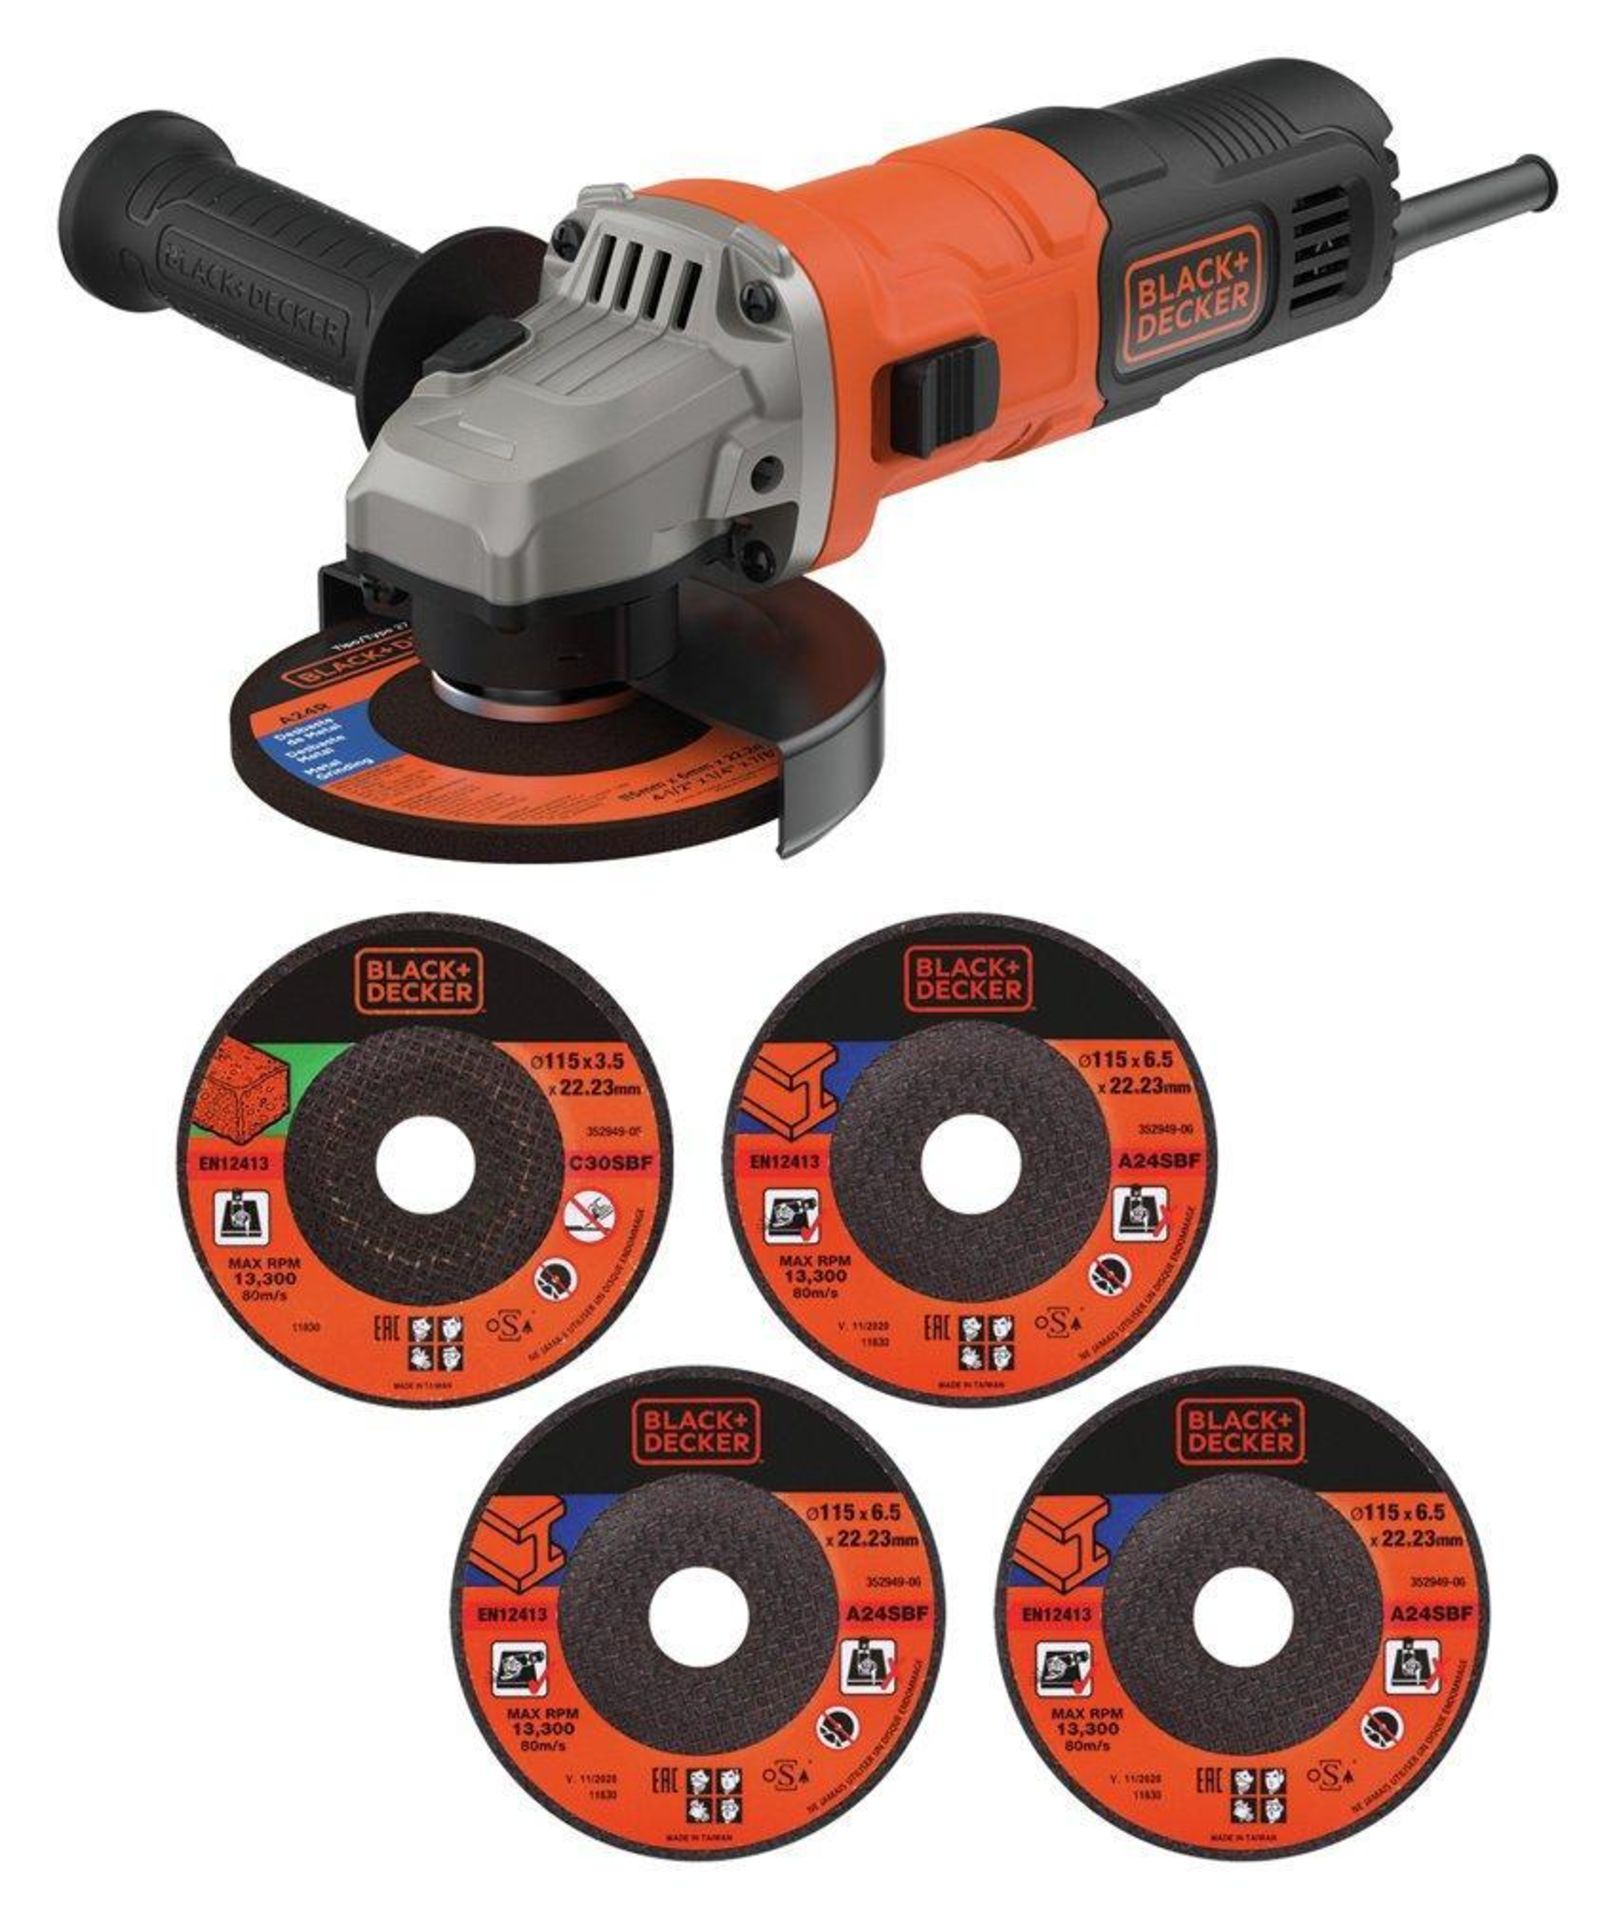 Black and Decker BEG010A5 Angle Grinder + 5 Discs 115mm - SR43.The BEG010A5 is a 115mm (4 1/2")